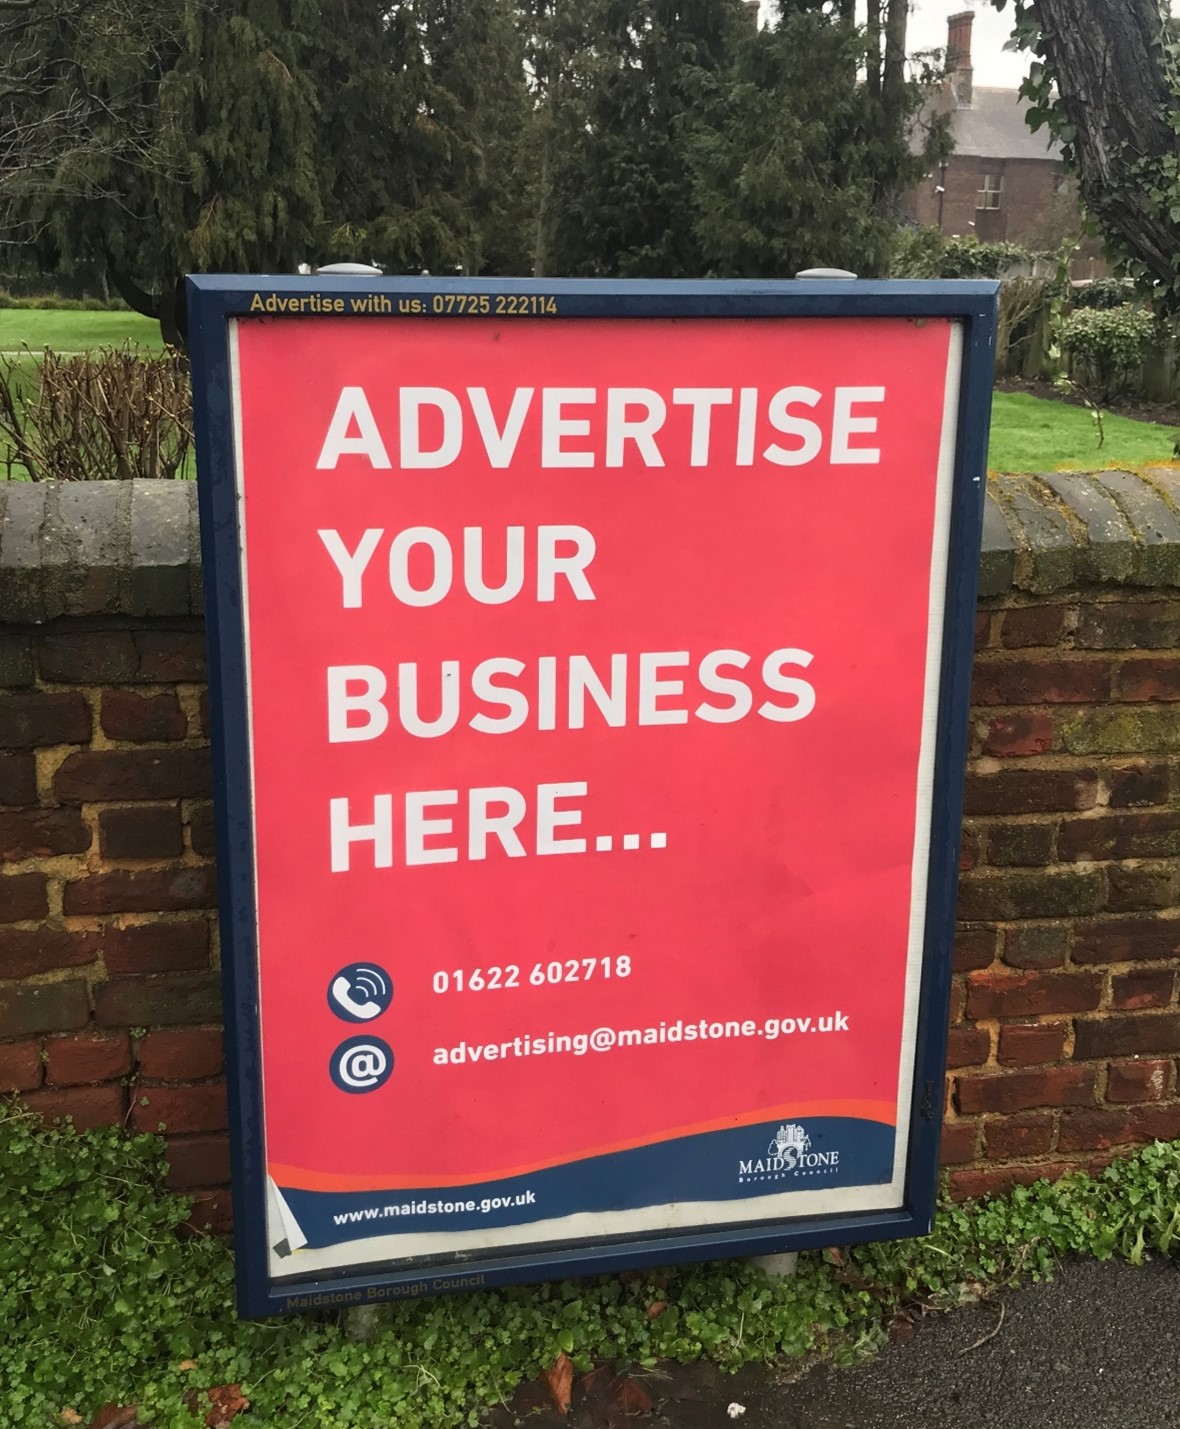 A poster with text to indicate how an advert would display